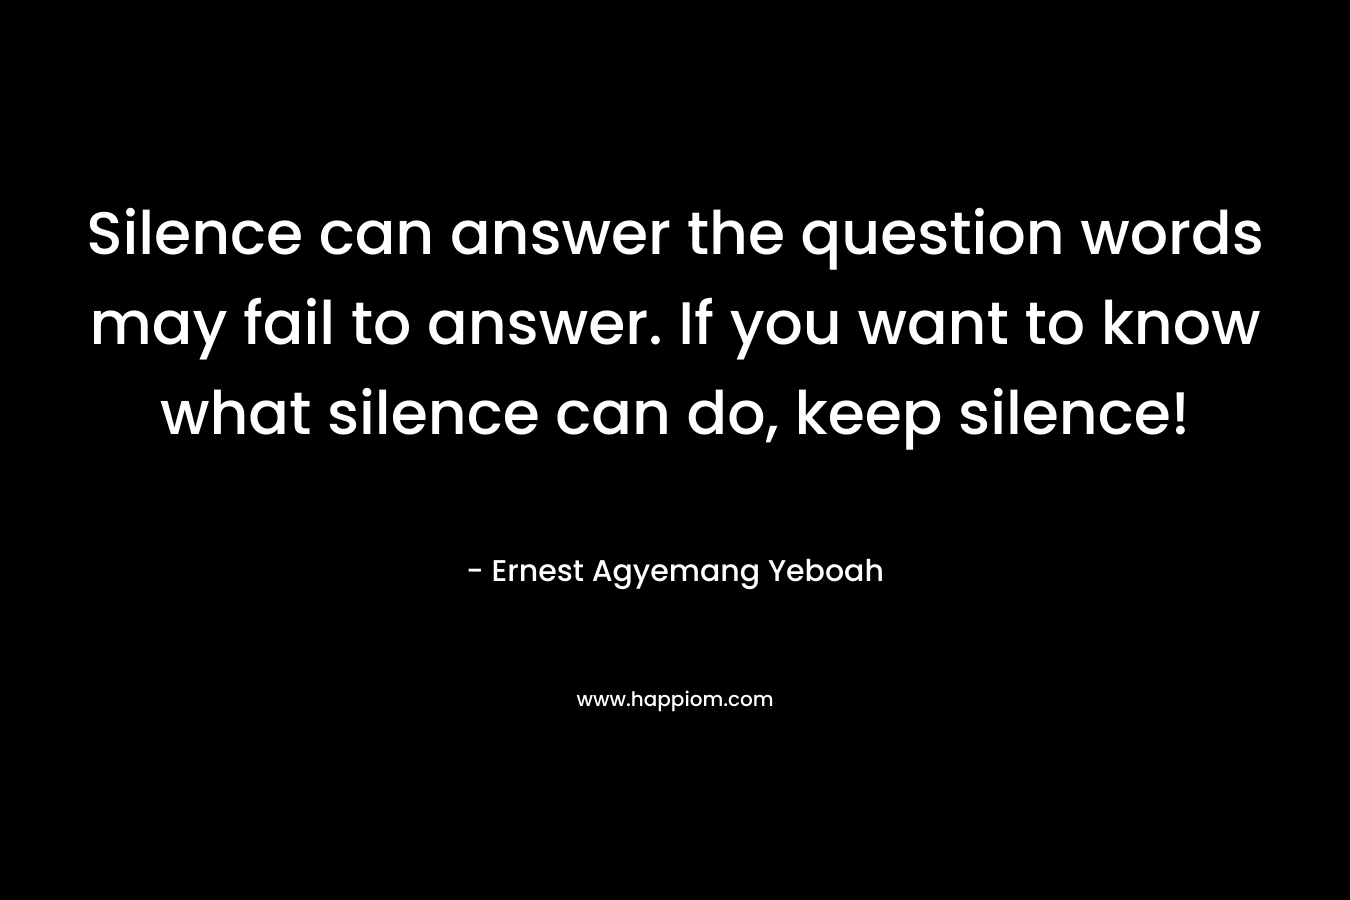 Silence can answer the question words may fail to answer. If you want to know what silence can do, keep silence!